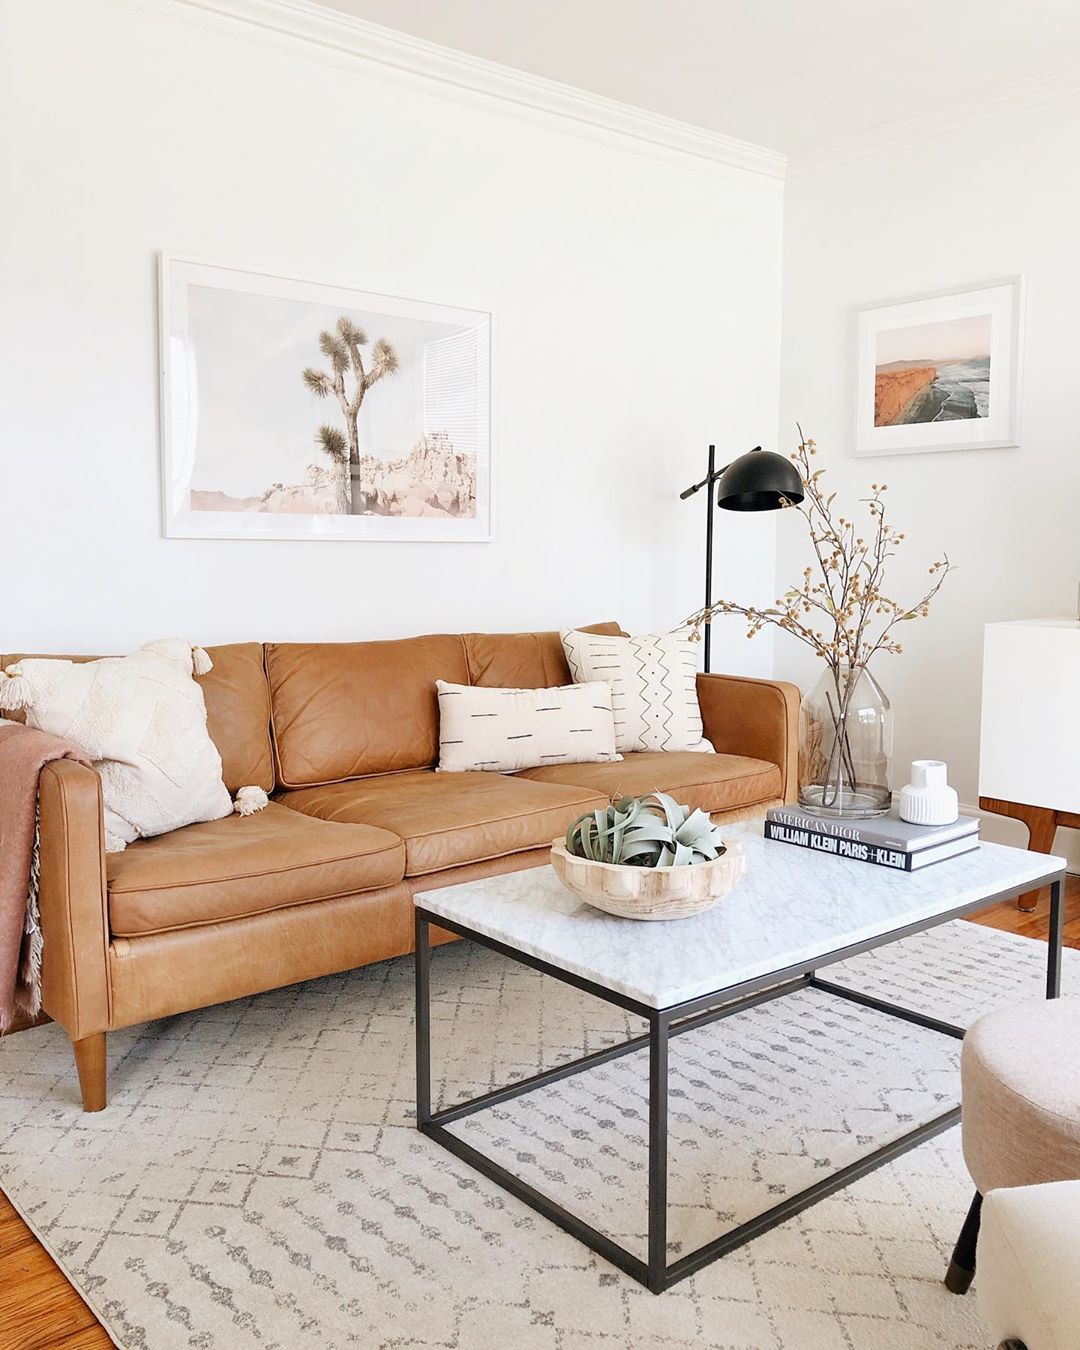 Modern & Minimalist Living Room with Geometric Furniture. Photo by Instagram user @southwestbysoutheast